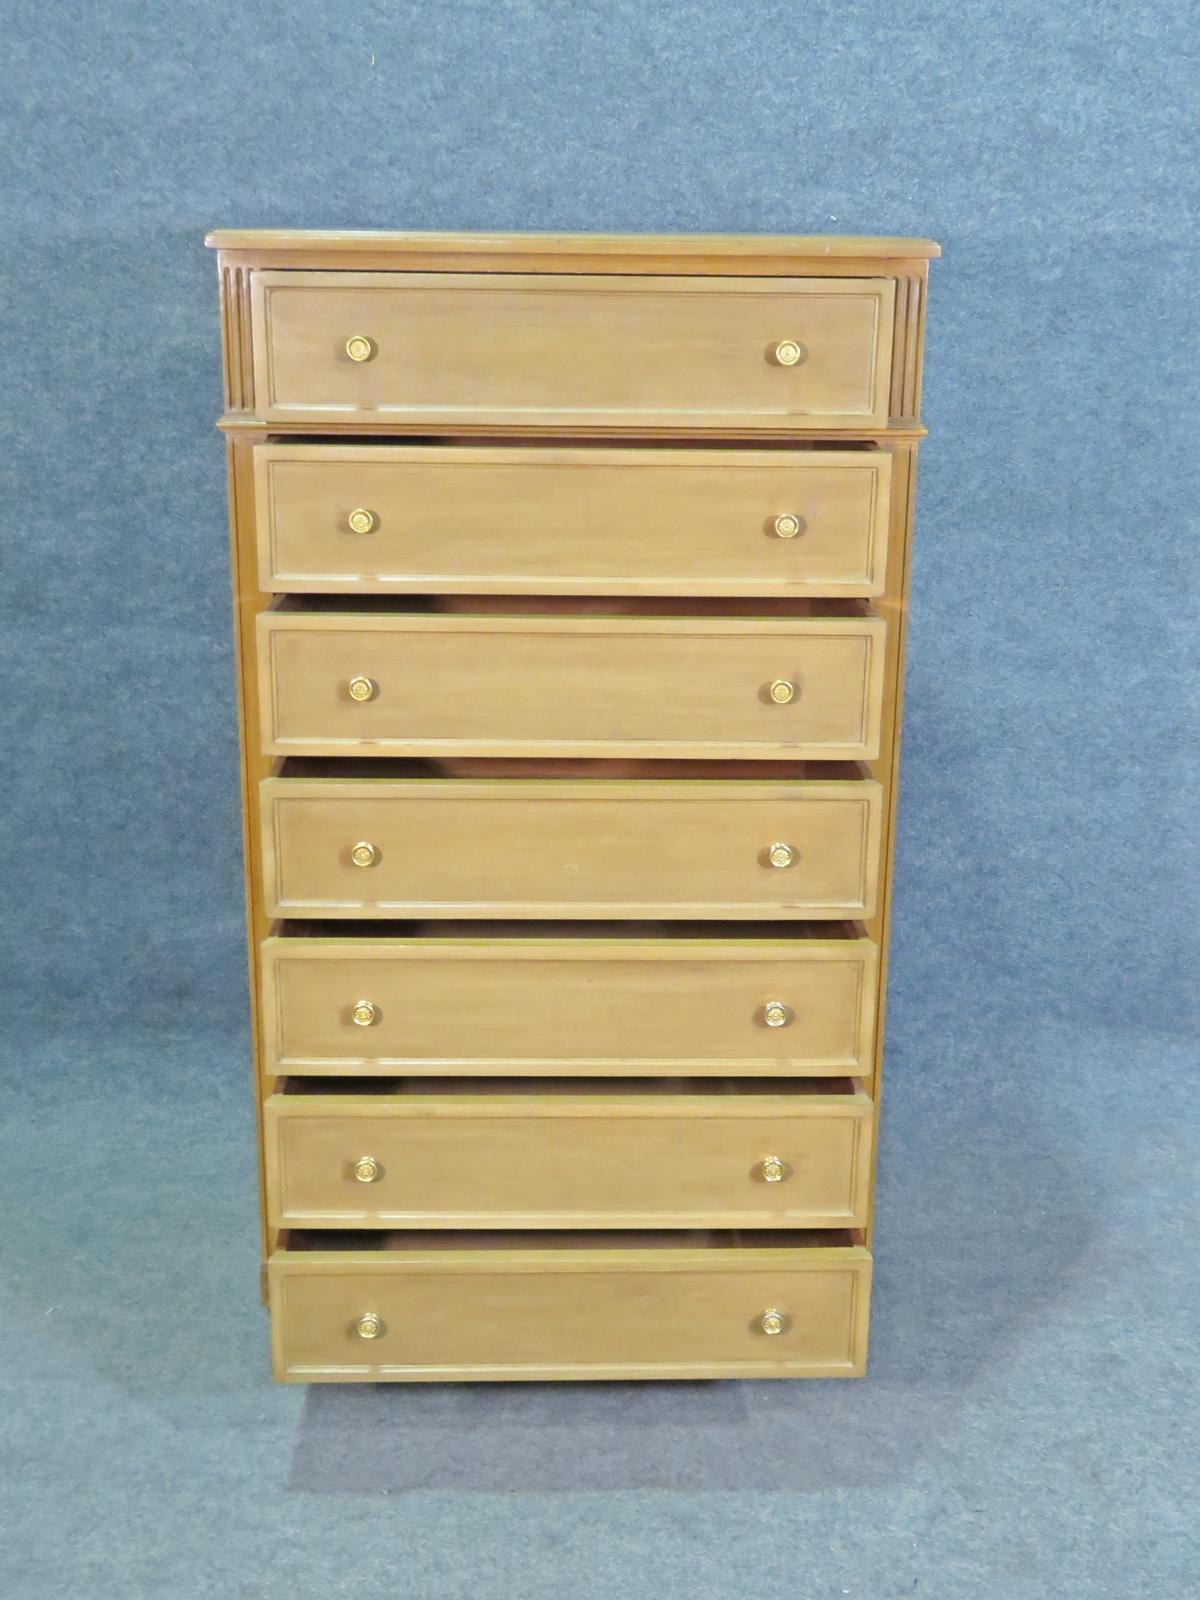 Louis XVI Maison Jansen Style Tall Chest of Drawers 1 of 2 Similar Chests